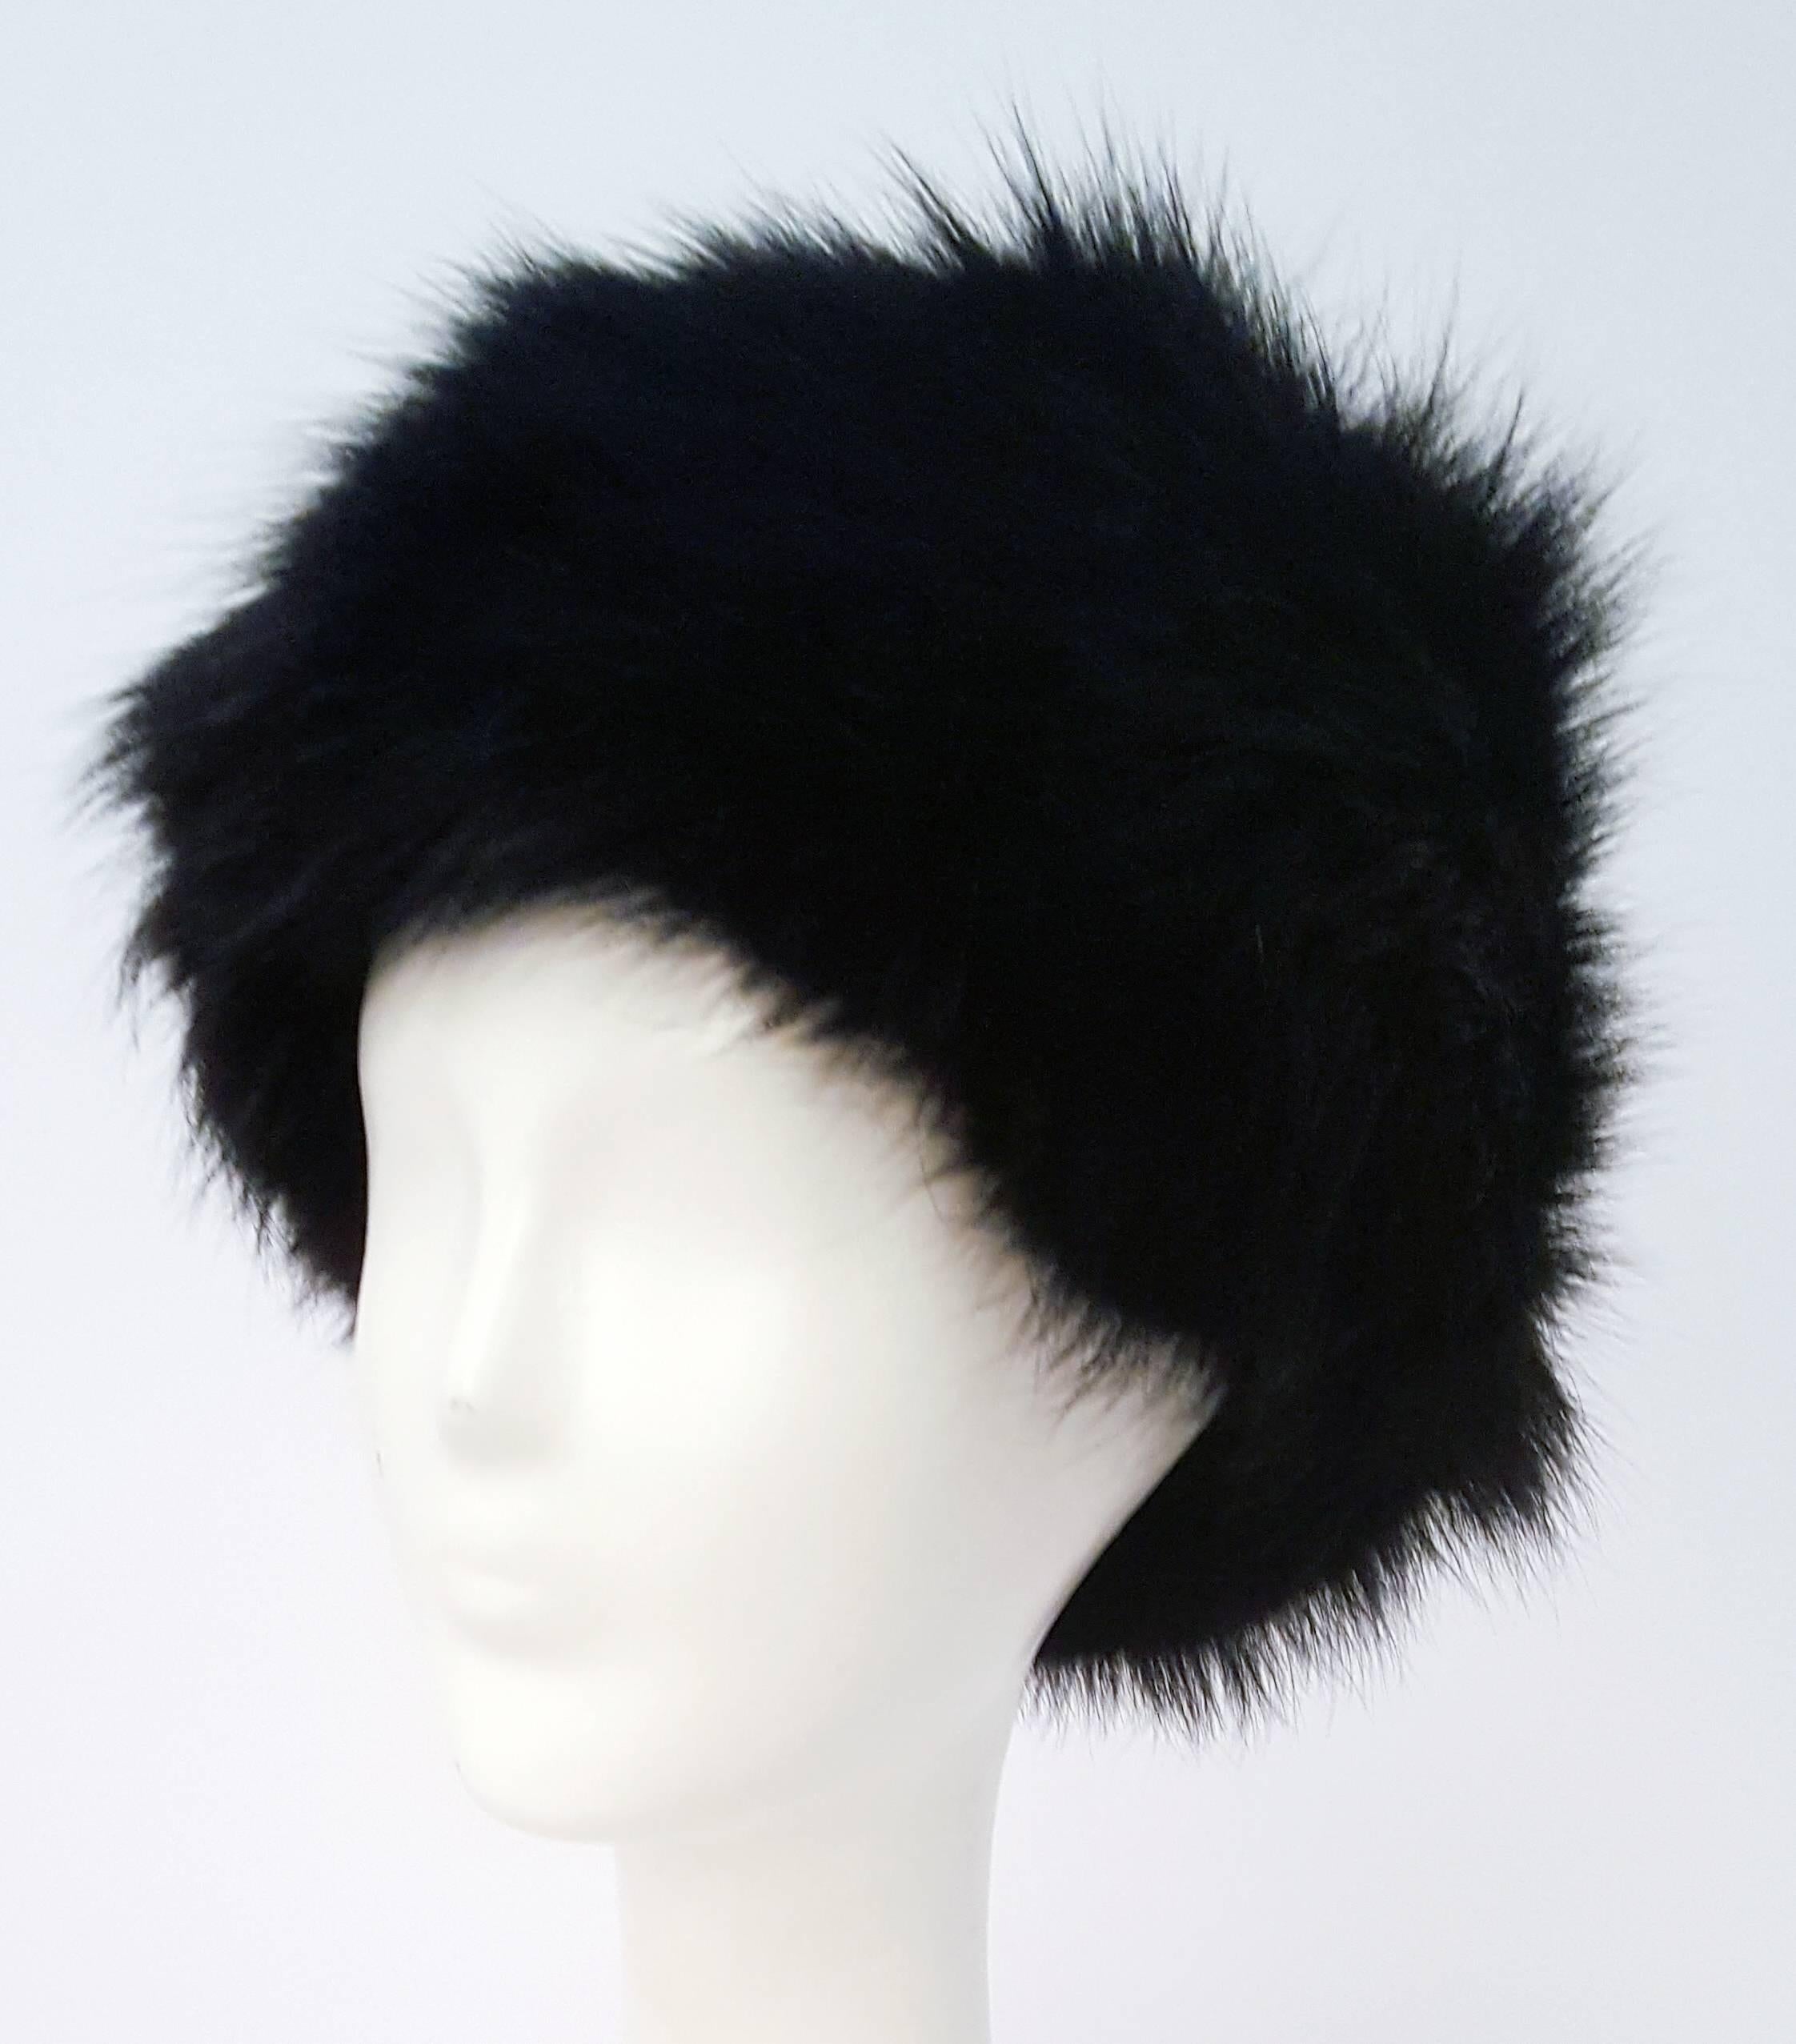 80s Black Fox Fur Hat. Very dense fur, does not shed. Elasticated knit hat band. 22" circumference.